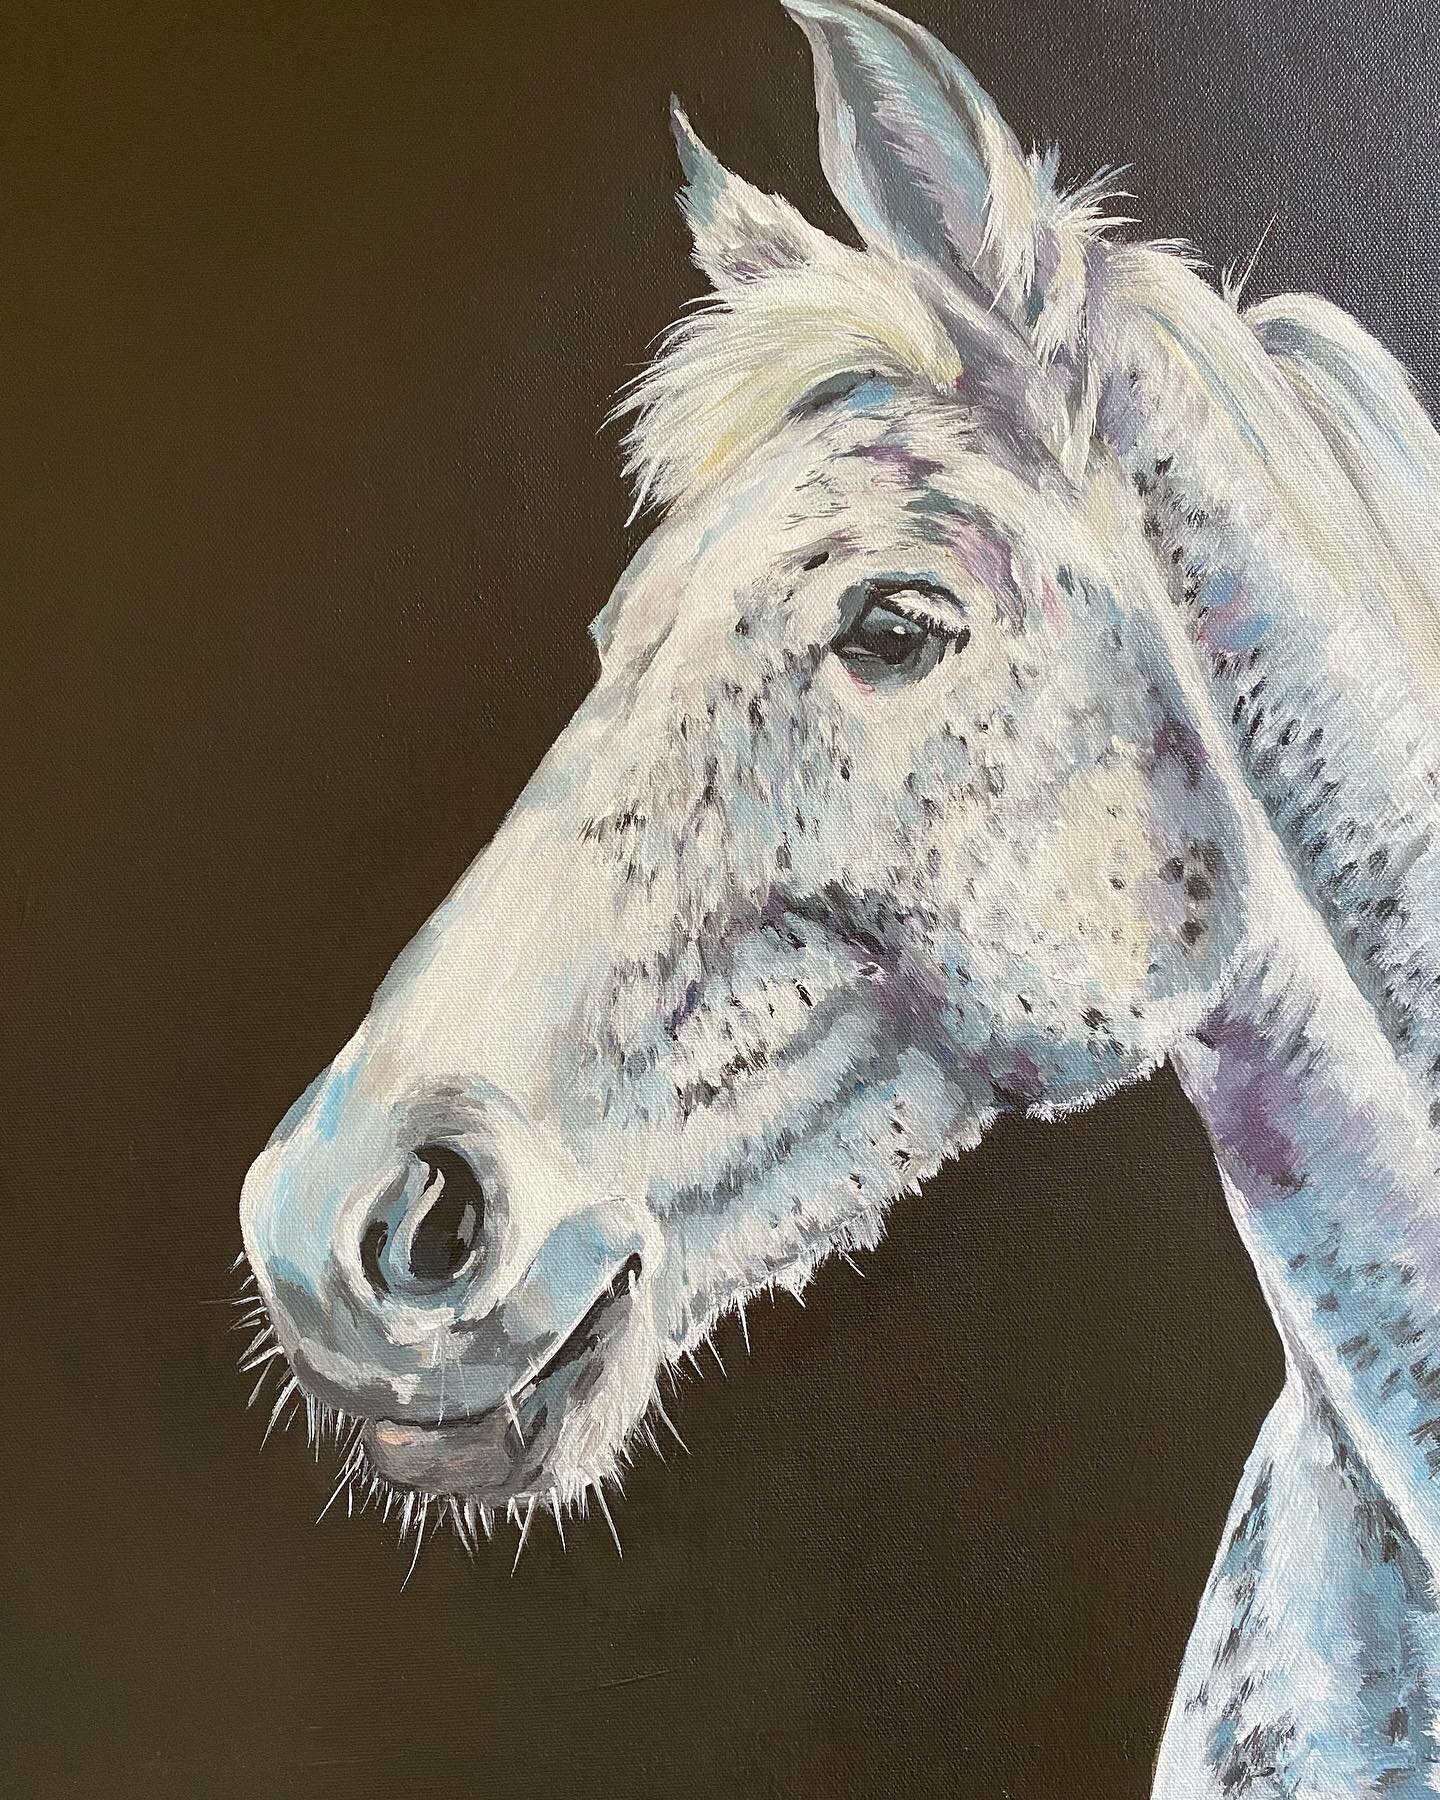 Milla
Acrylic on canvas
16 x 20
I can now share this beautiful creature.  Painted and delivered for a special 60th birthday gift.
Always a pleasure to work closely with clients to ensure they are totally happy with my work and the recipient will have